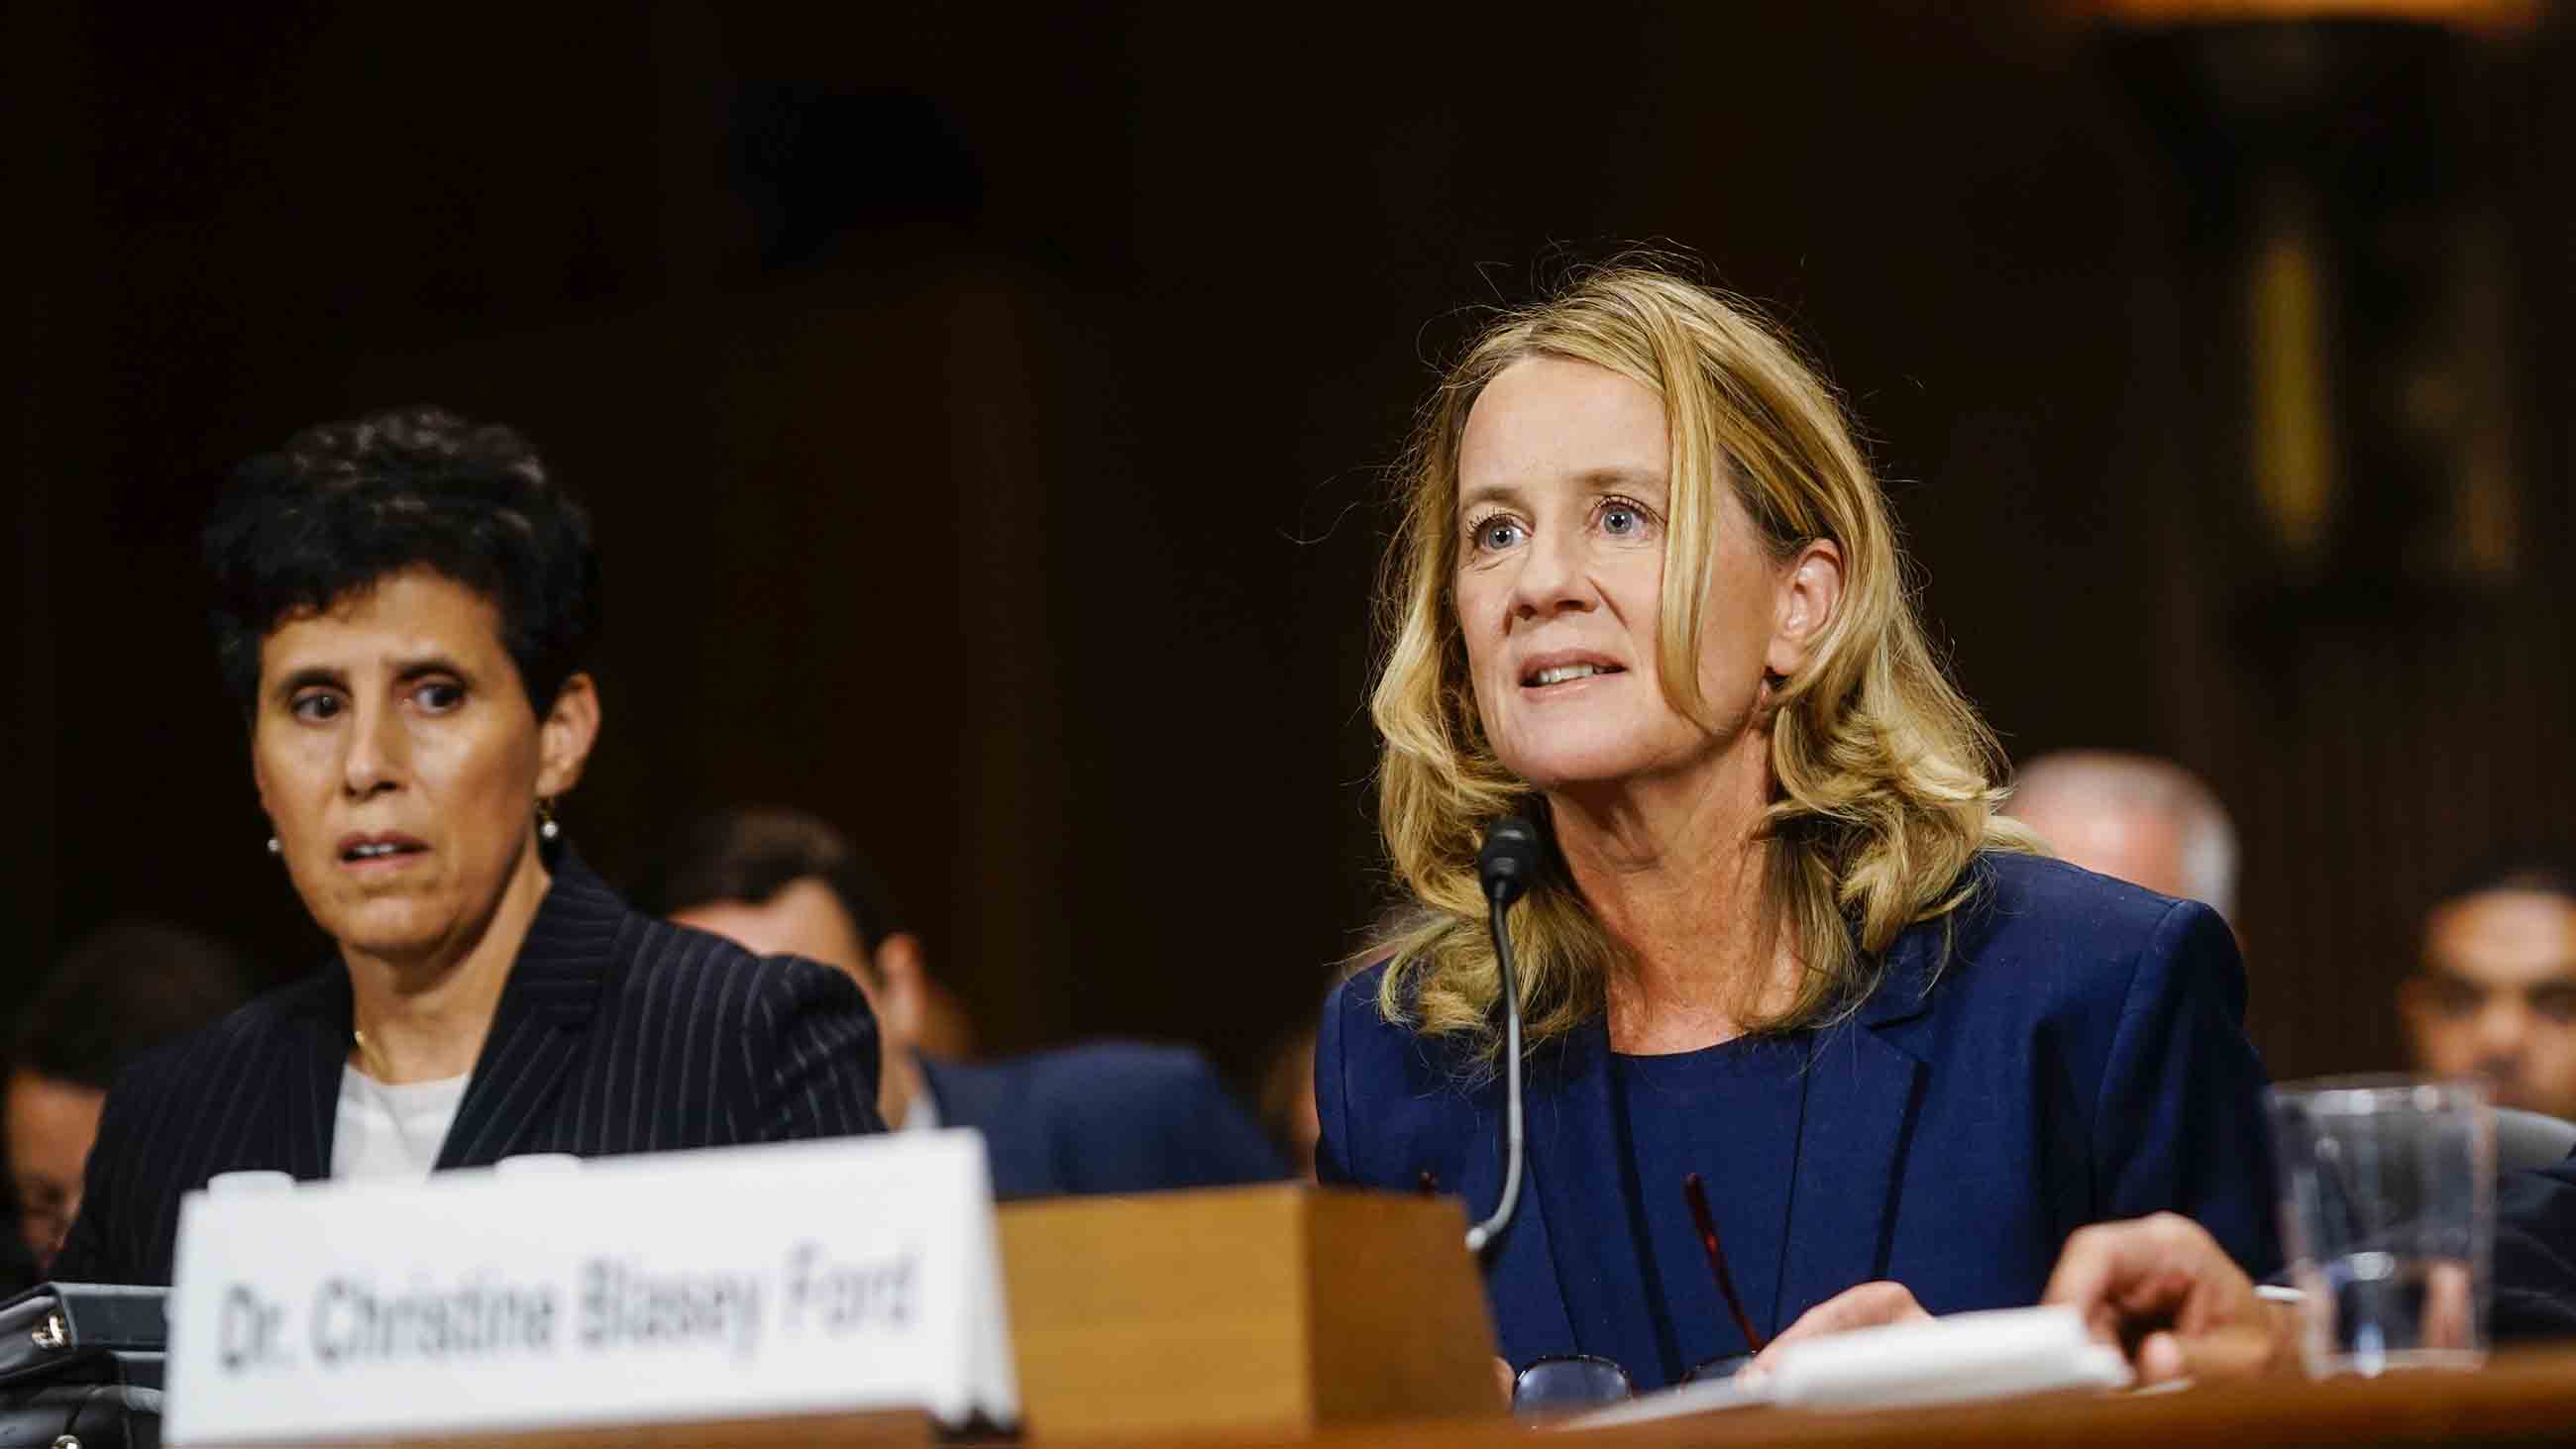 Christine Blasey Ford, with lawyer Debra S. Katz, left, answers questions at a Senate Judiciary Committee hearing on Thursday, September 27, 2018 on Capitol Hill.